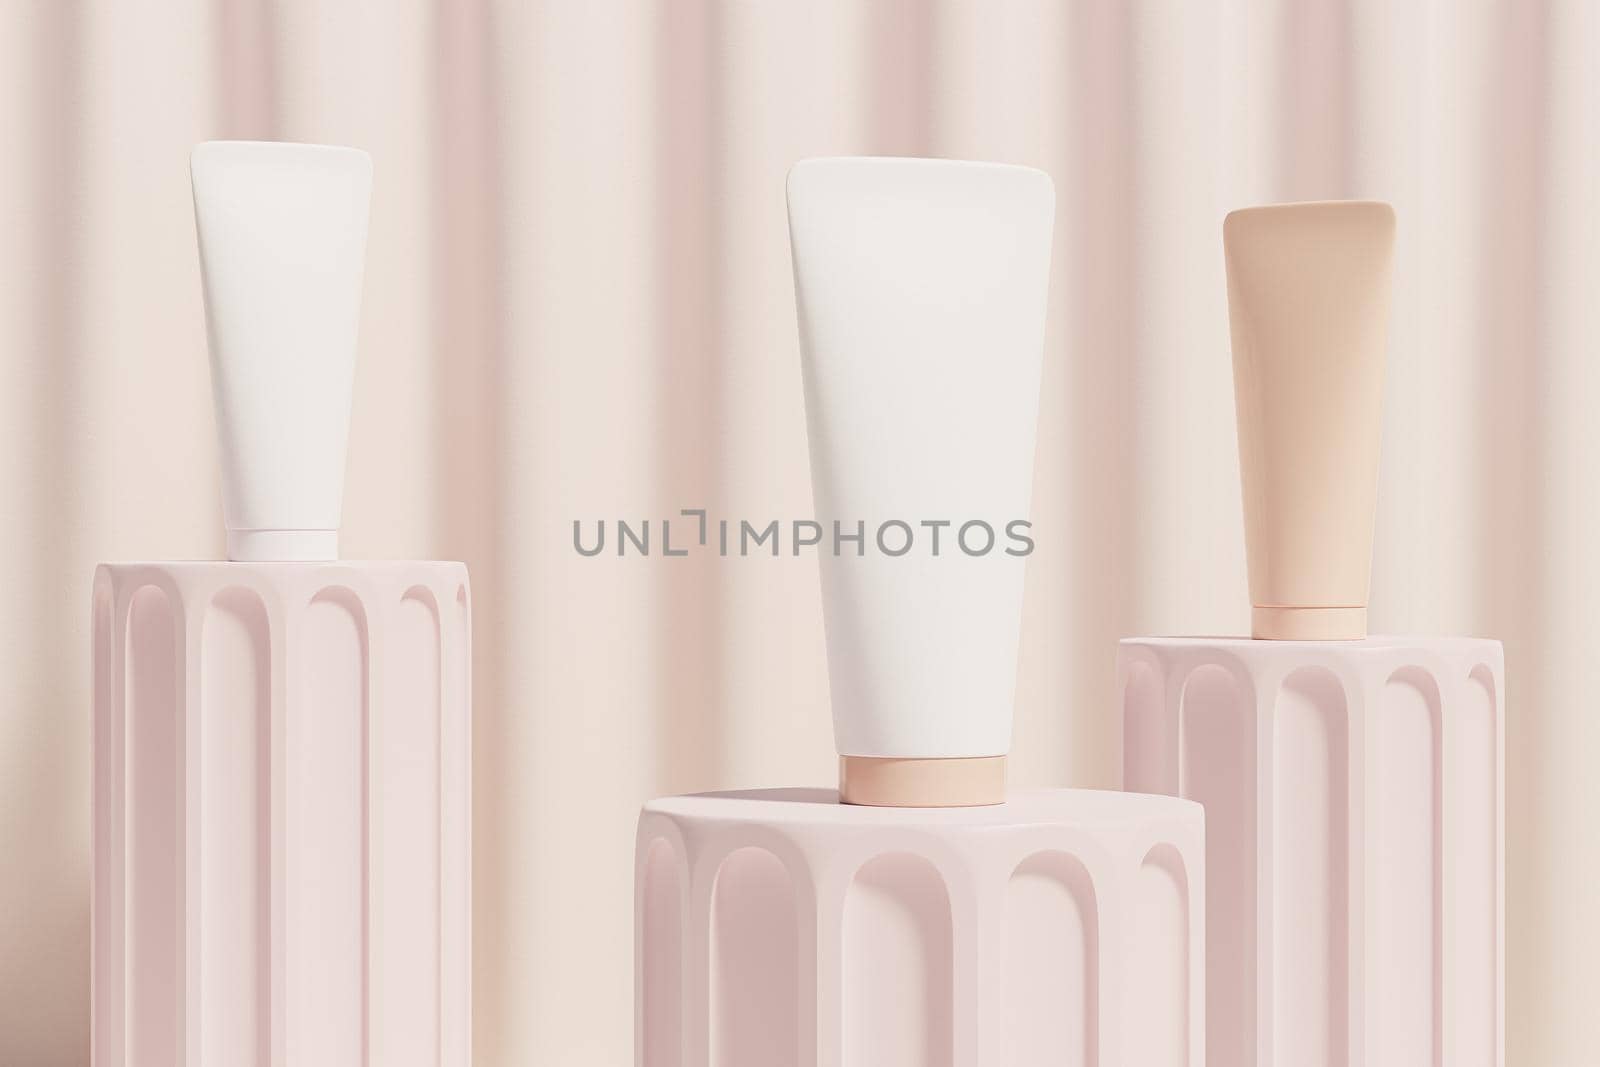 Mockup tube for cosmetics products, template or advertising on pillar podiums, beige background, 3d illustration render